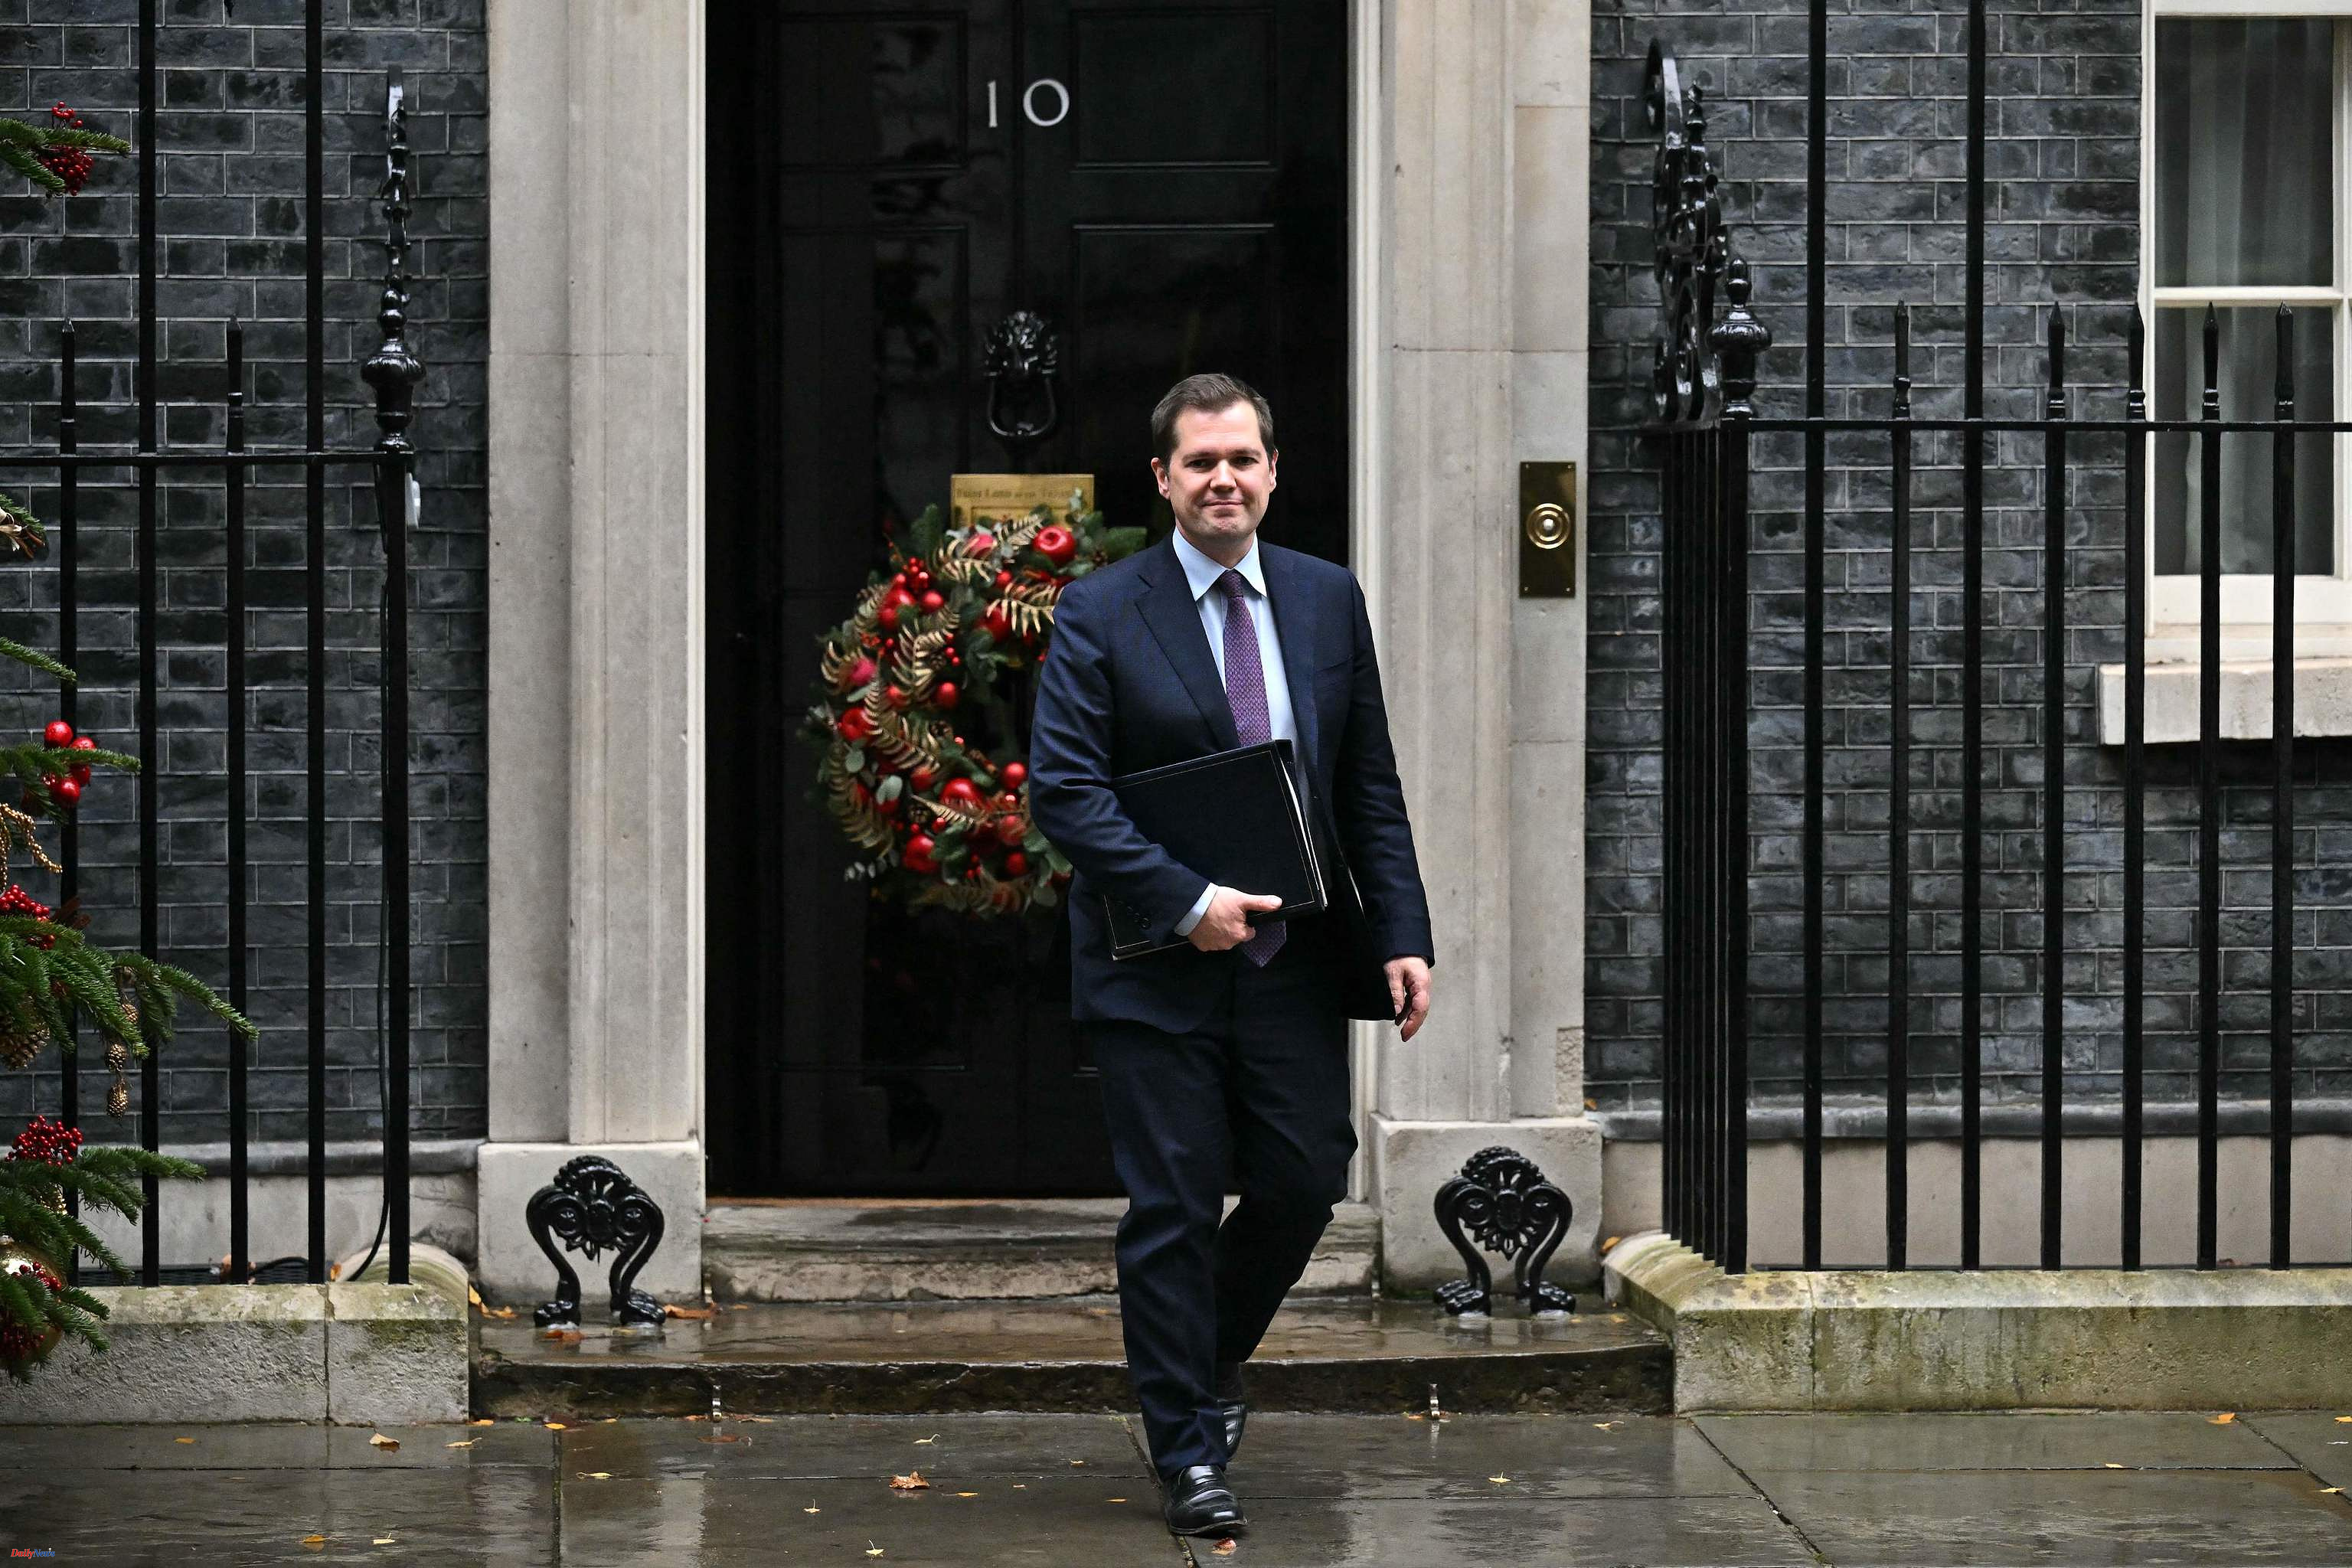 United Kingdom British Immigration Minister Robert Jenrick resigns: "I have strong disagreements with the Government's policy on immigration"